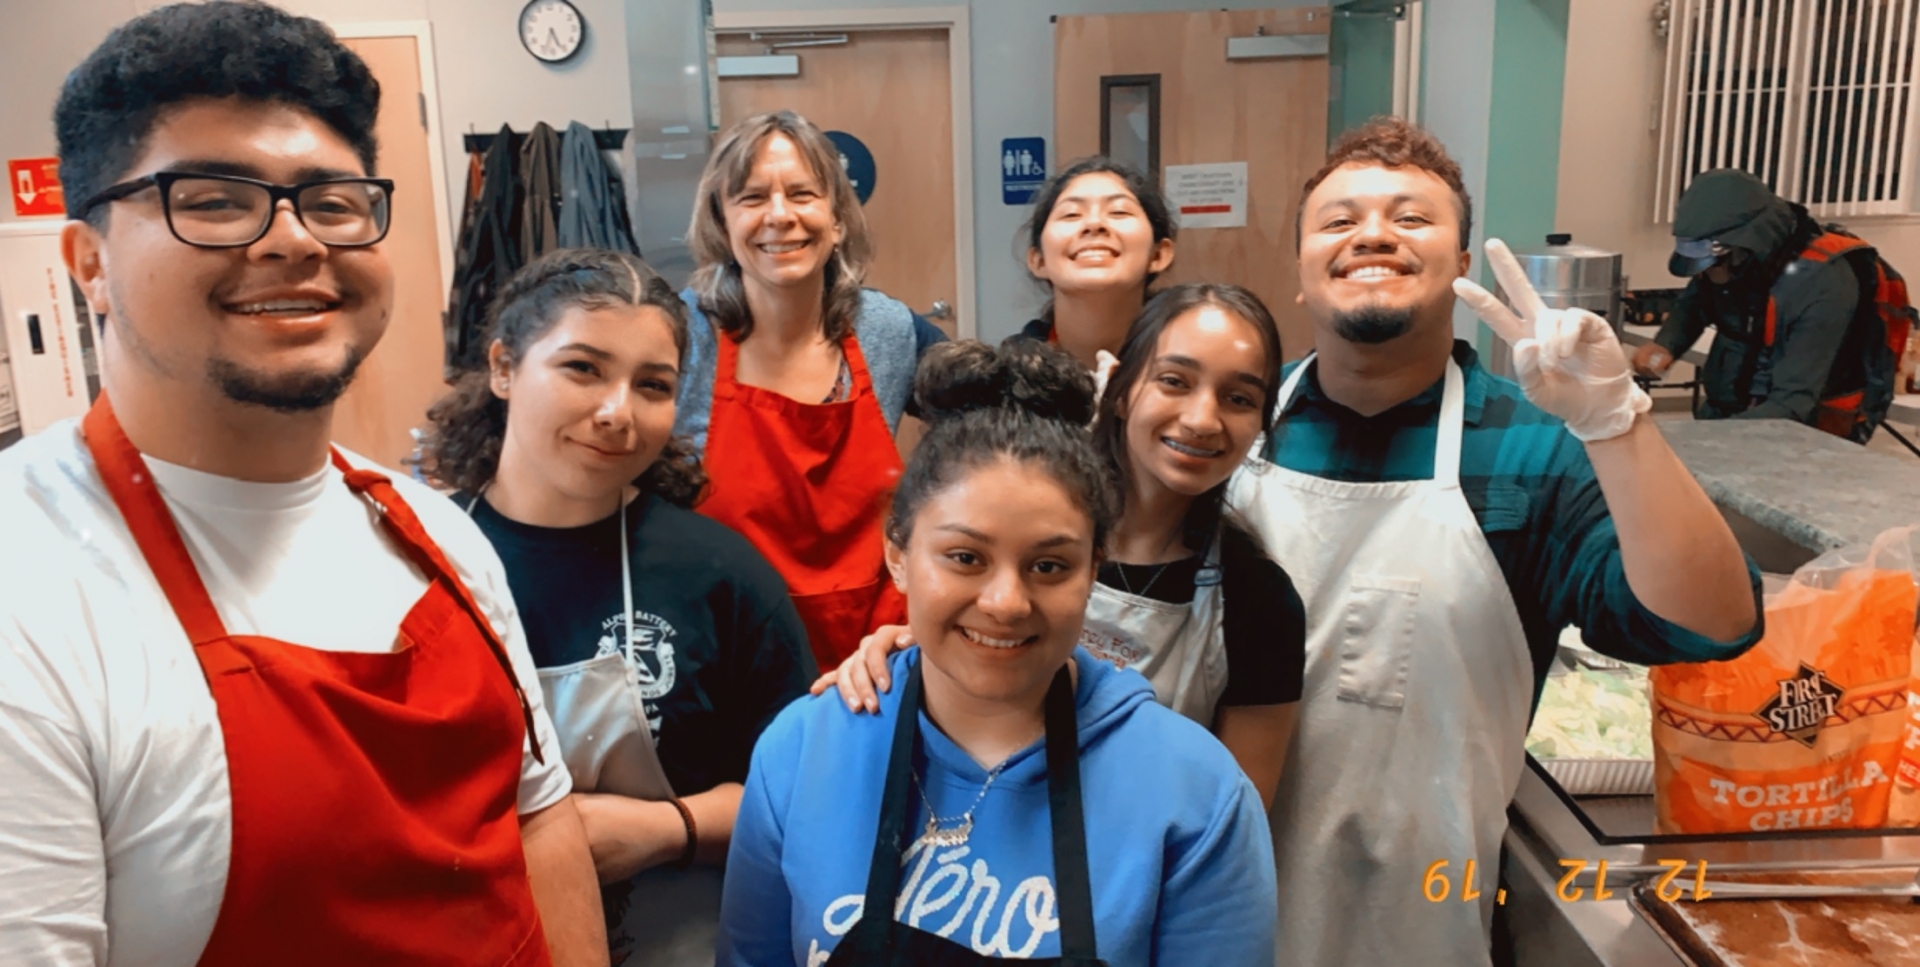 Enrique Galvan and a group of students pose for a picture at a homeless shelter after working in the kitchen.